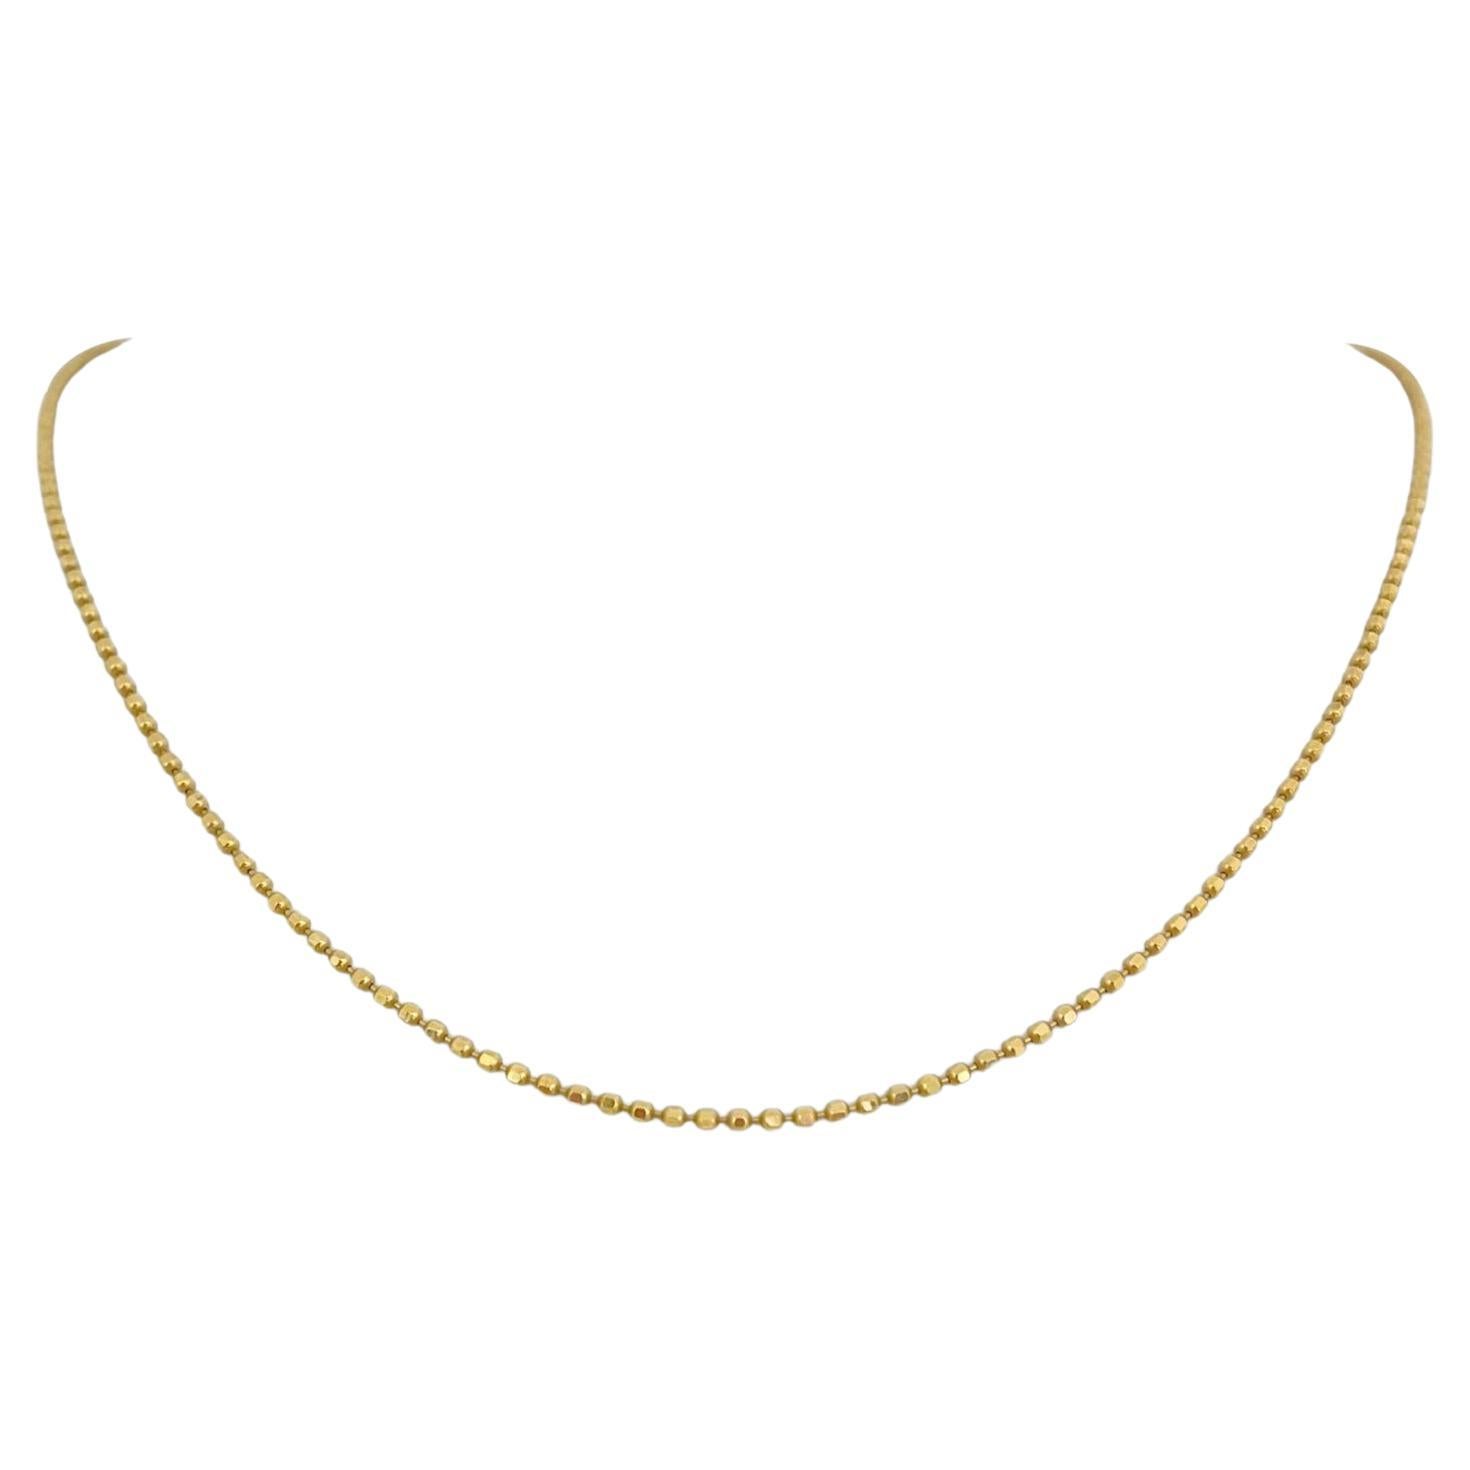 14 Karat Yellow Gold Thin Ball Bead Link Chain Necklace Italy 